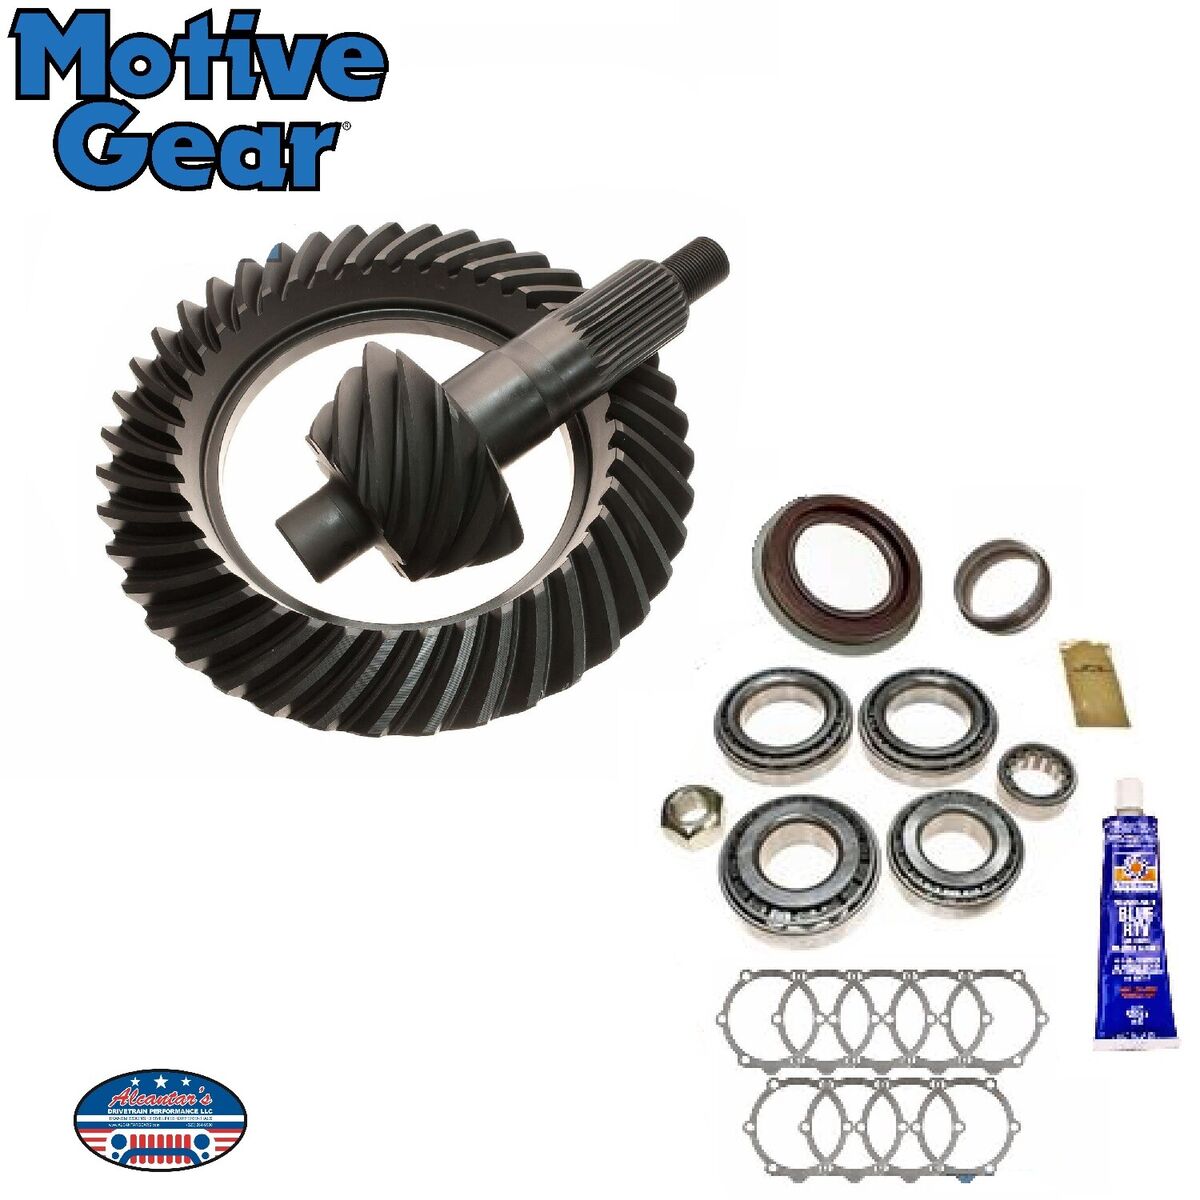 Motive Gear GM10.5-342 3.42 Ratio Differential Ring and Pinion for 10.5 (Inch) (14 Bolt)